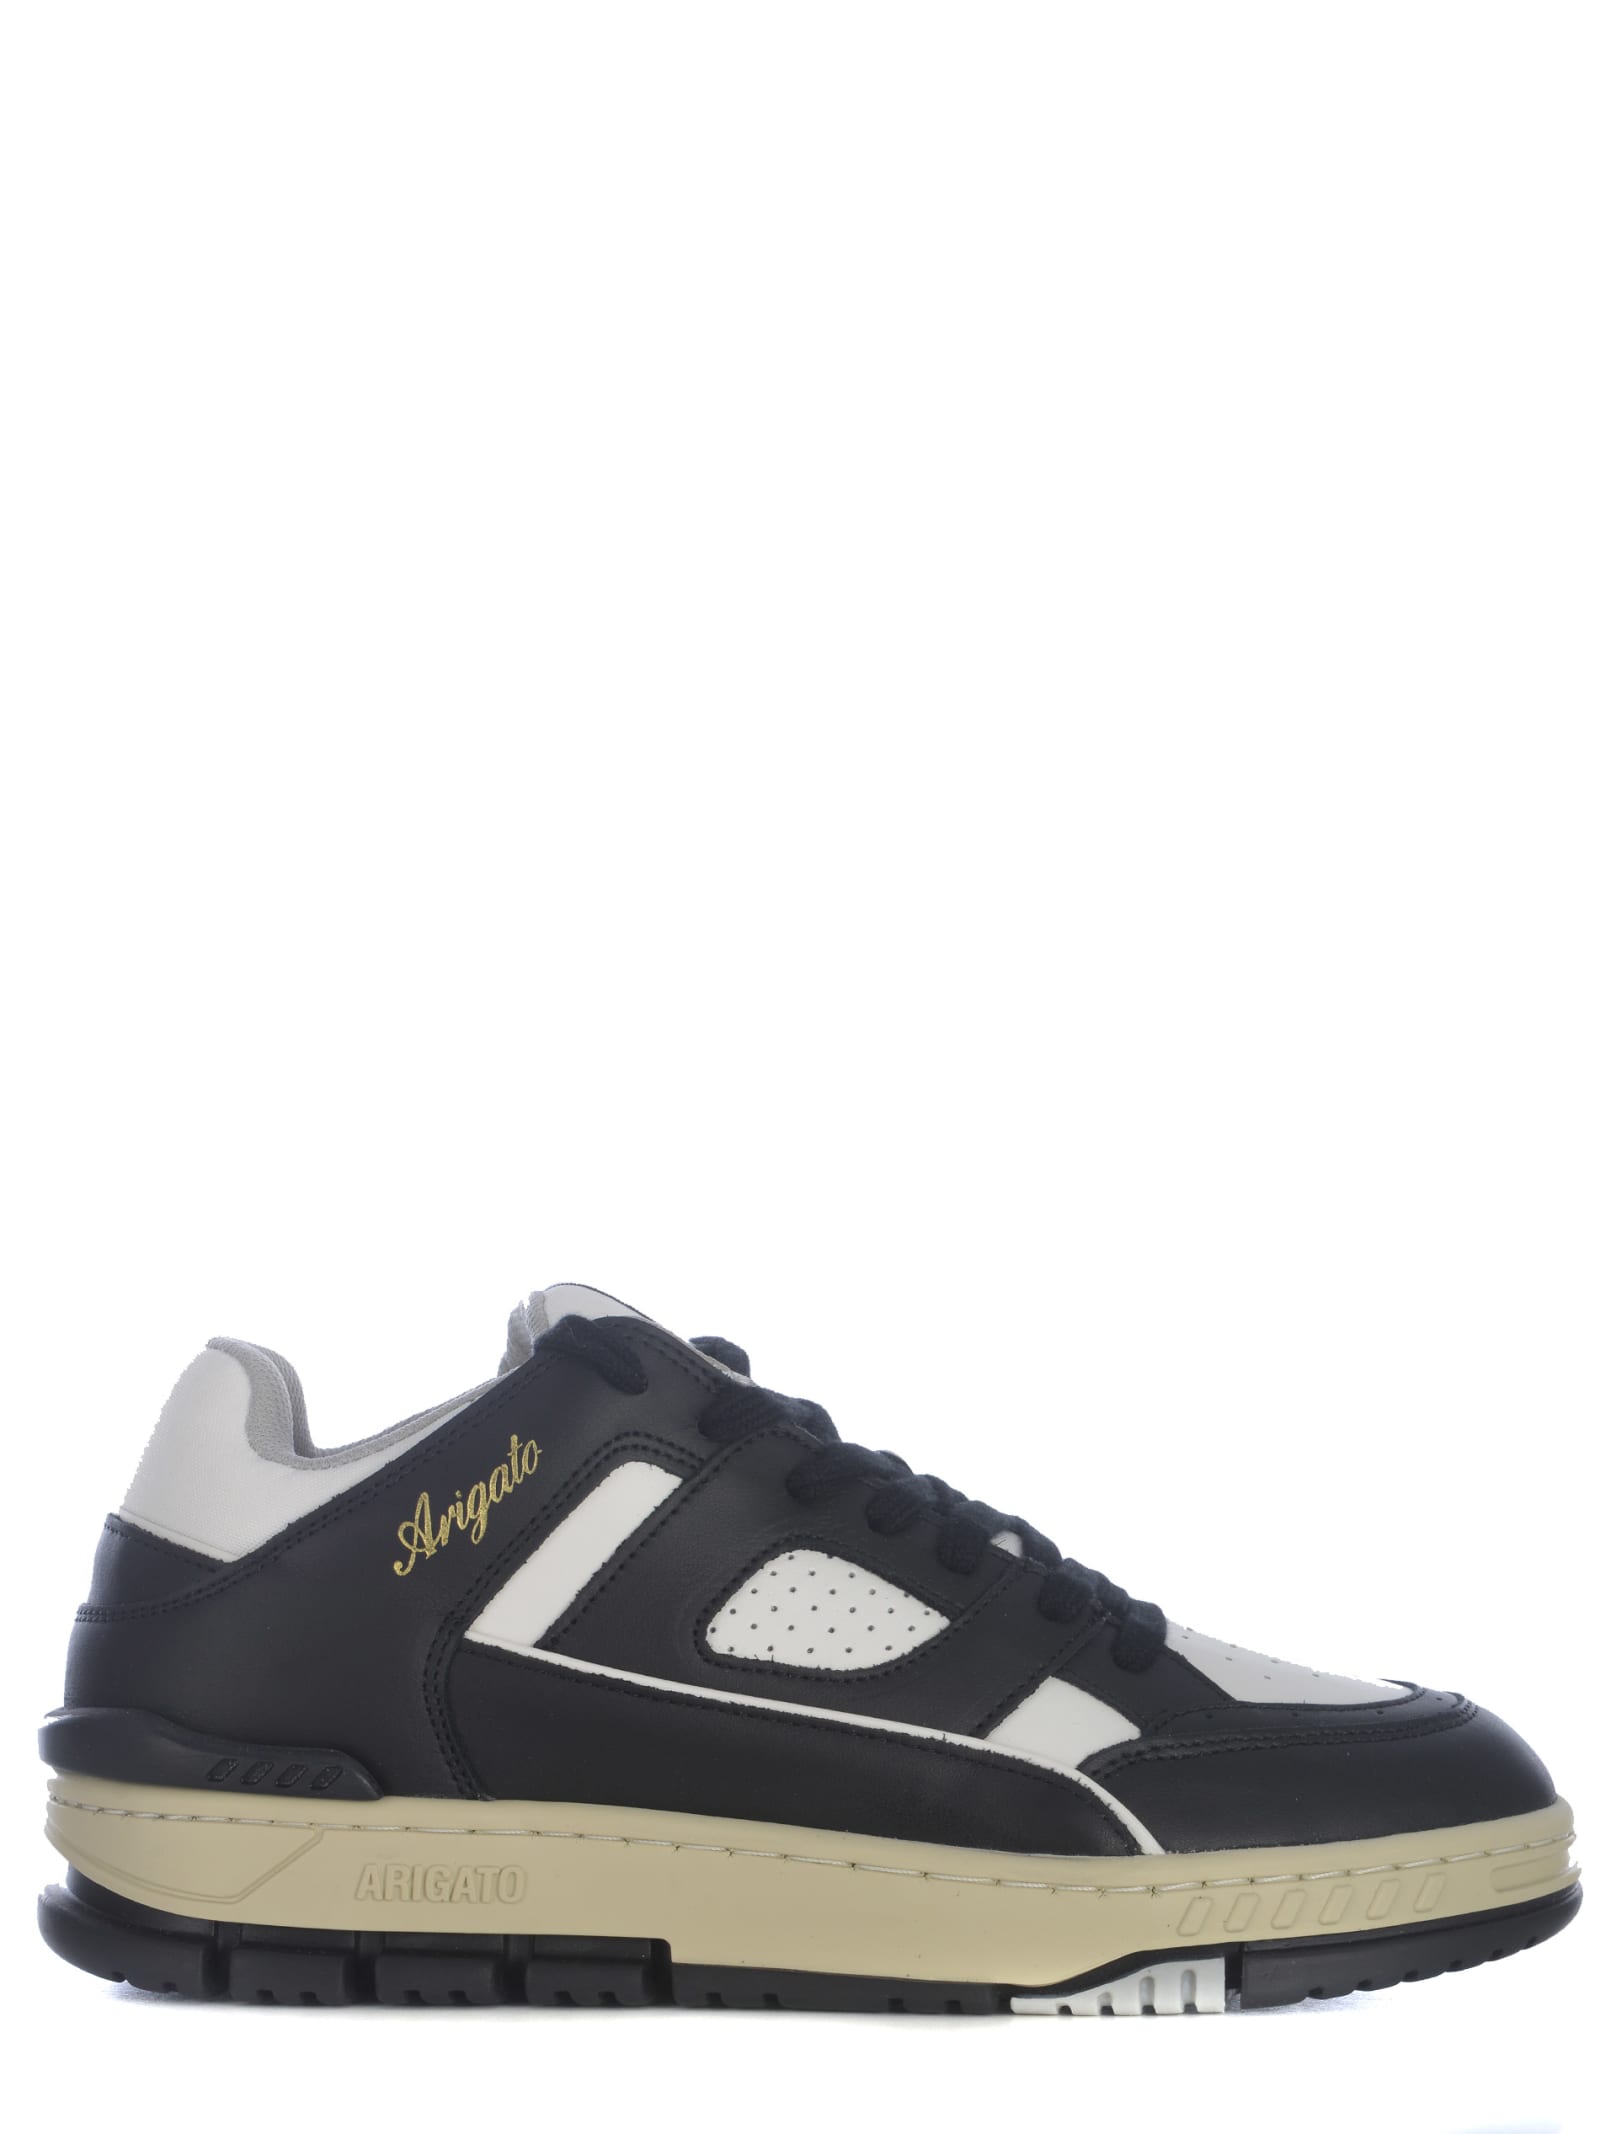 Shop Axel Arigato Sneakers  Arealo Made Of Leather In Bianco Nero